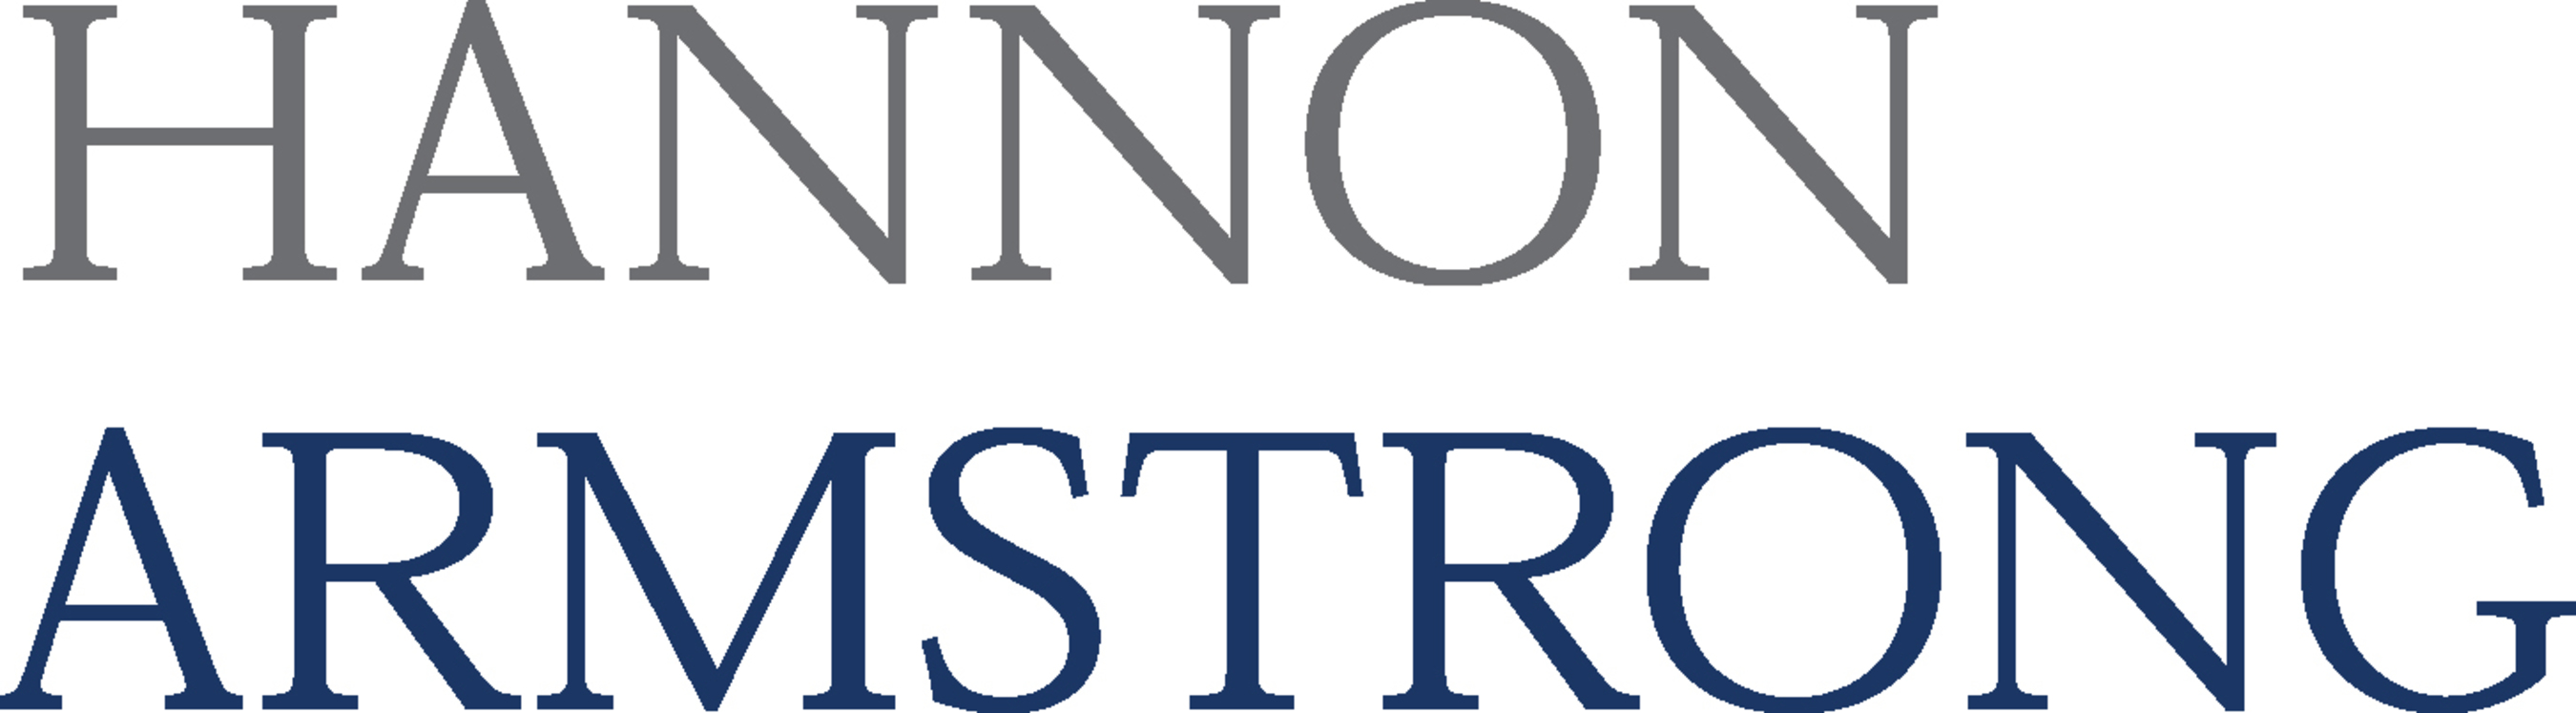 Hannon Armstrong Sustainable Infrastructure Logo